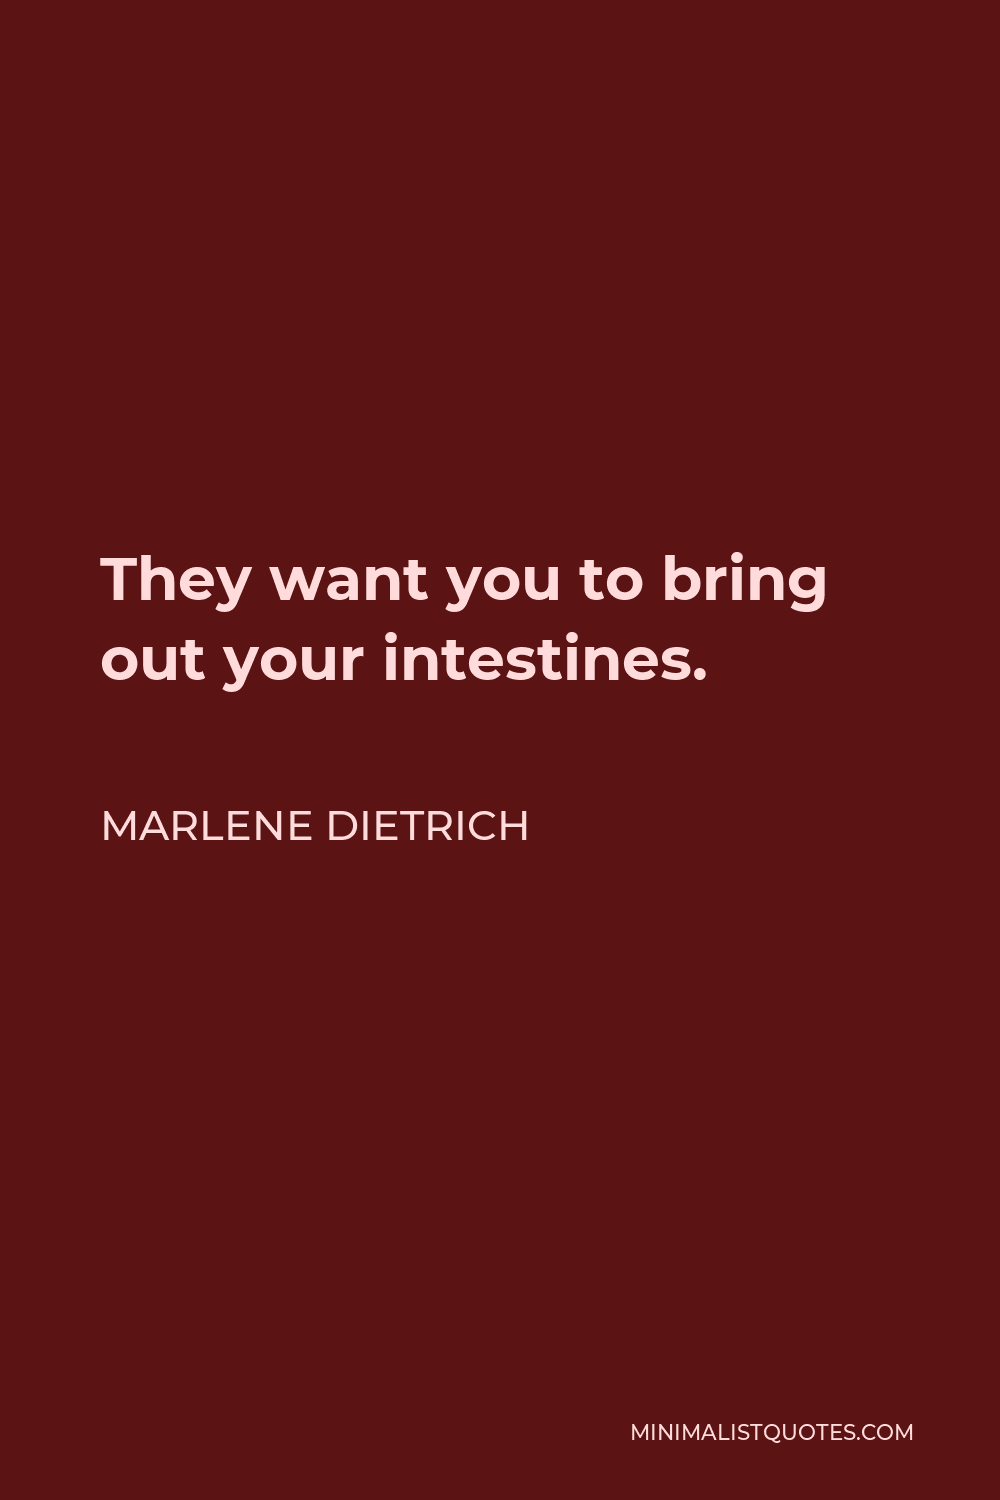 Marlene Dietrich Quote - They want you to bring out your intestines.